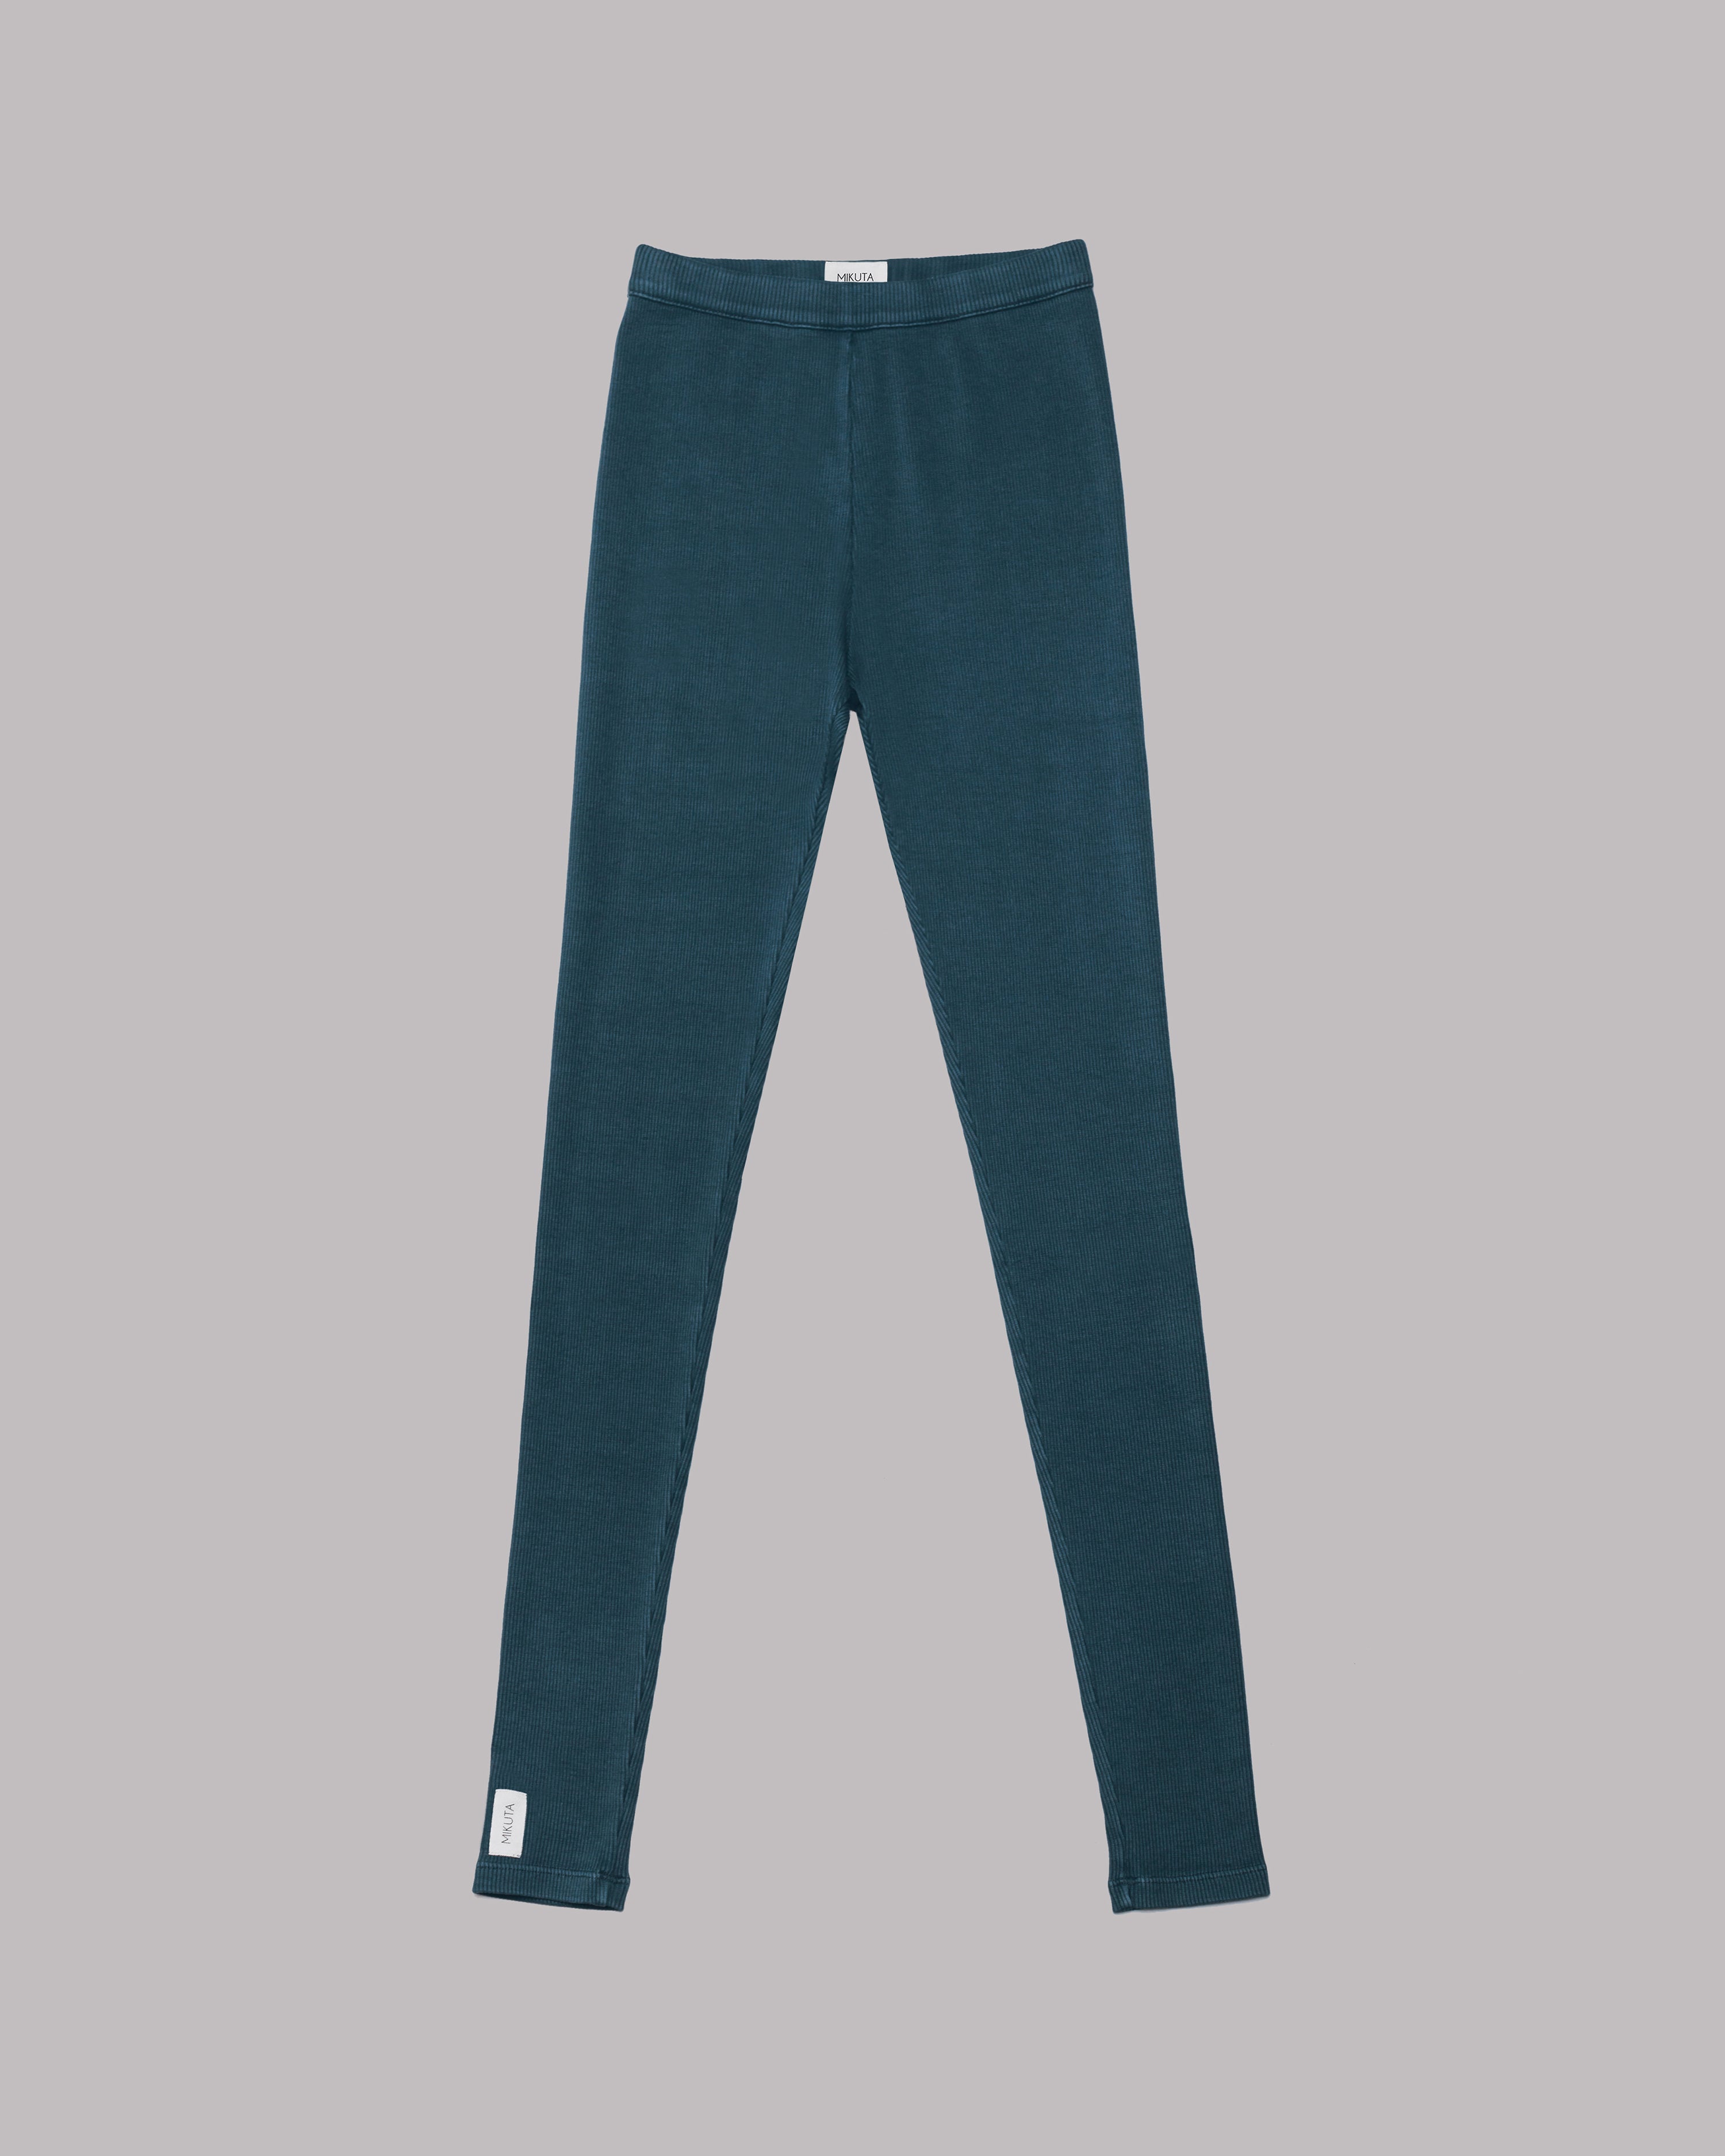 YEAR OF OURS Ribbed Pocket Legging in Deep Teal